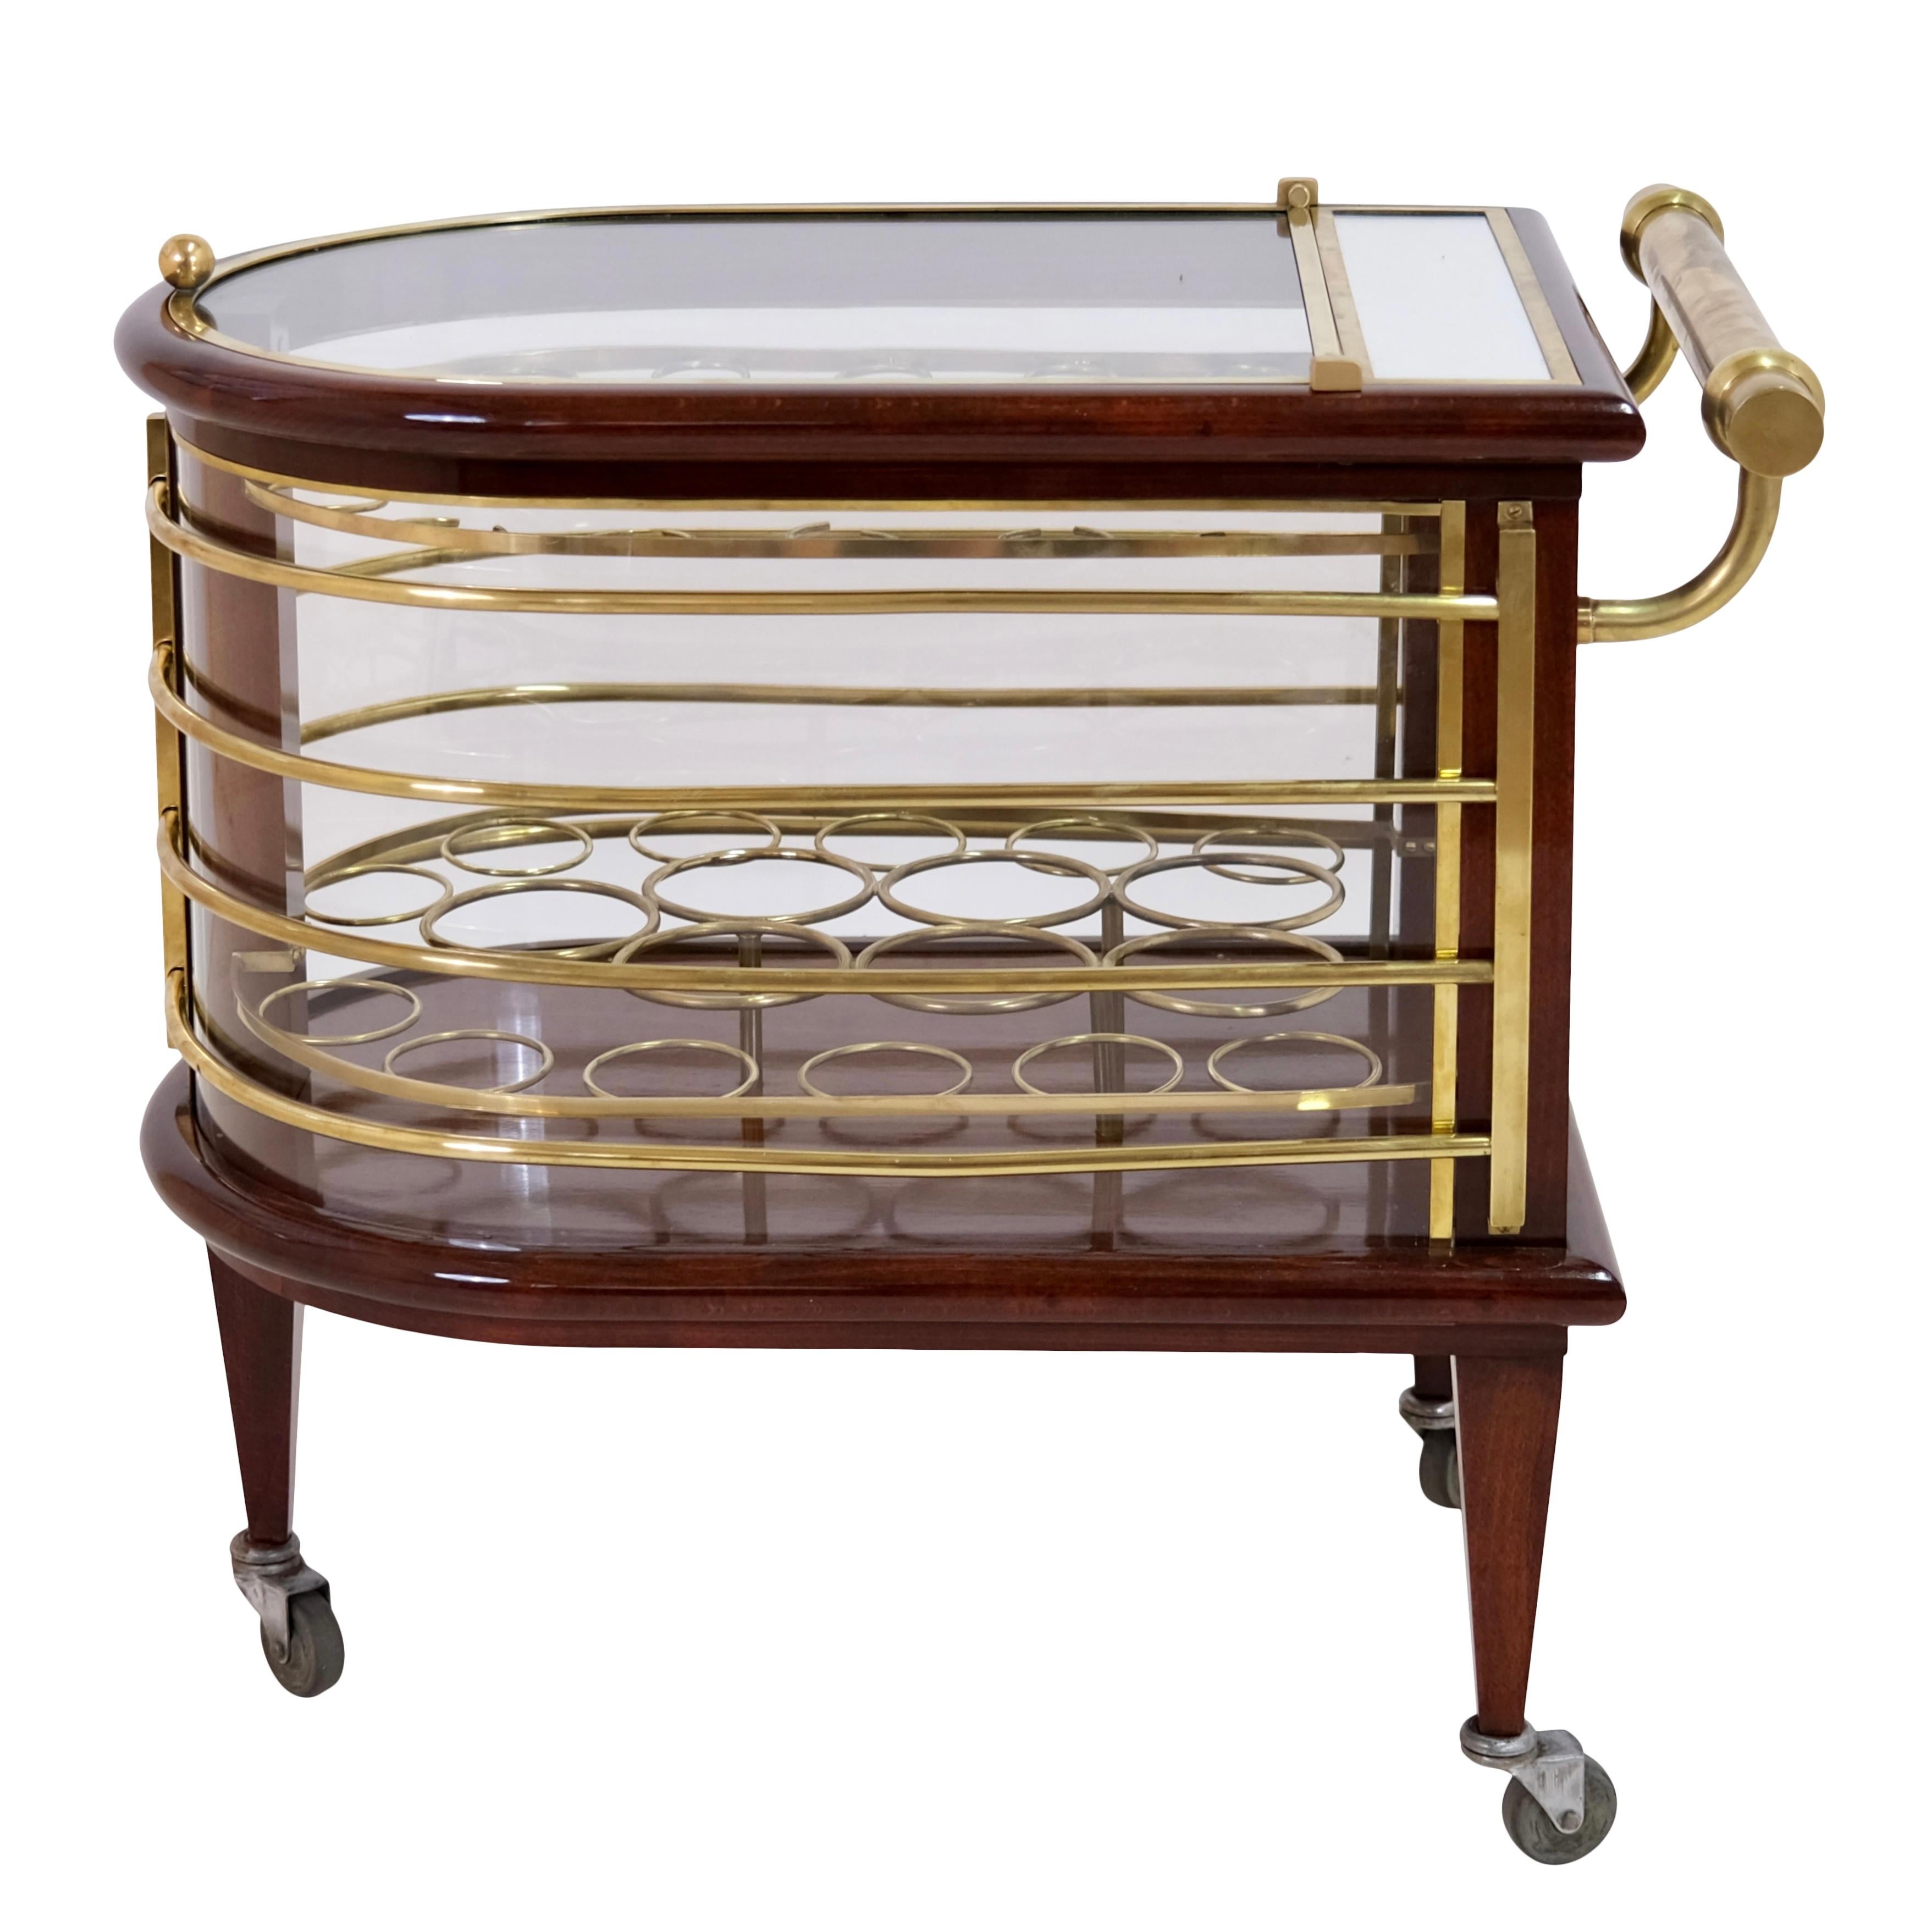 Luxury bar cart. 
Mahogany, shellac hand polished 
Brass and glass, cleaned 

Original Art Deco, France 1930s

Dimensions:
Width: 69 cm
height: 66 cm
Depth: 43 cm.